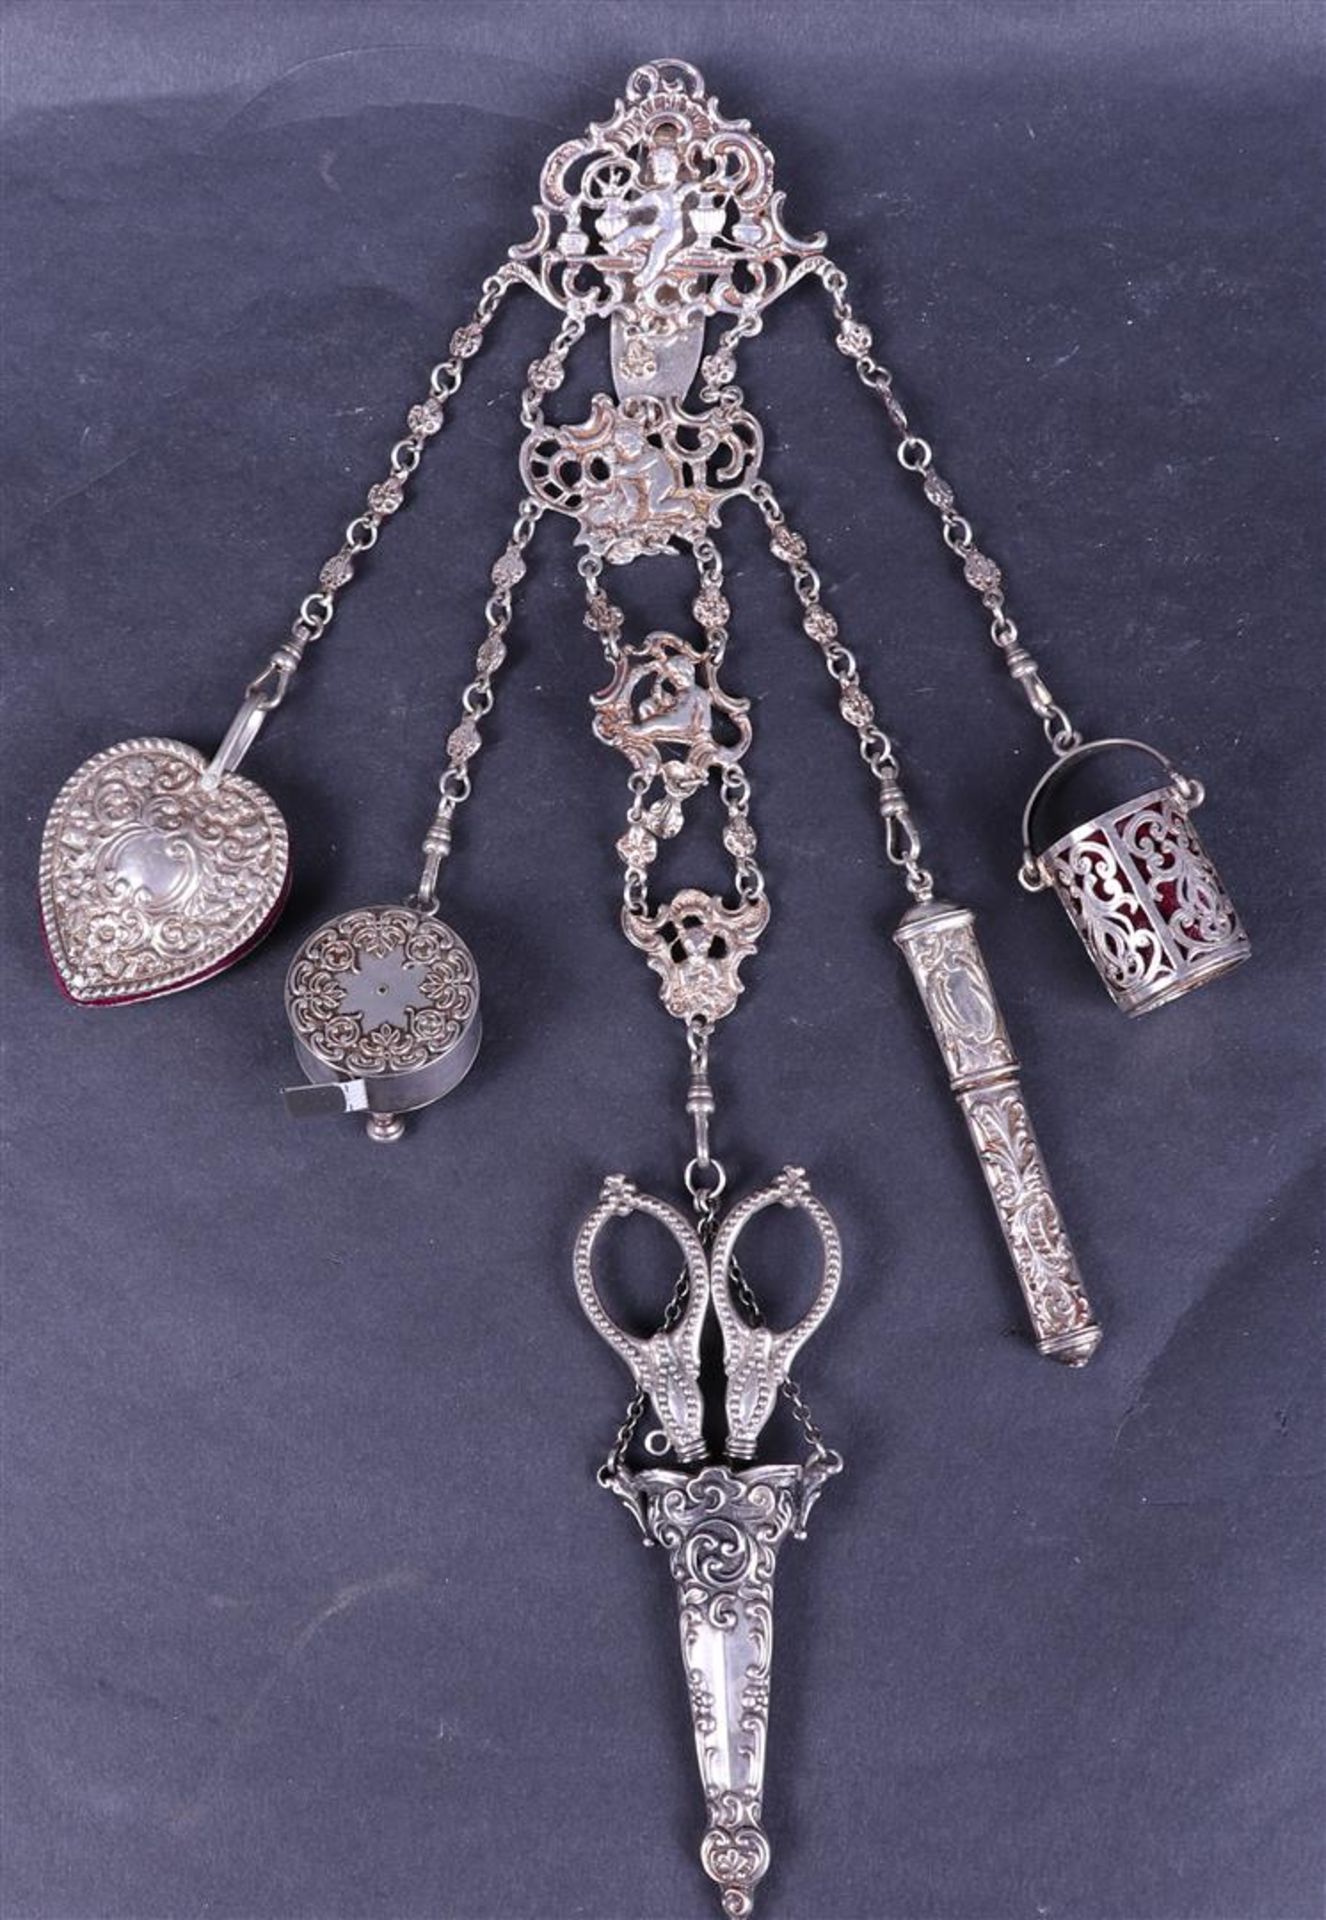 A silver chatelaine with scissors, a finger hold and various other attributes.